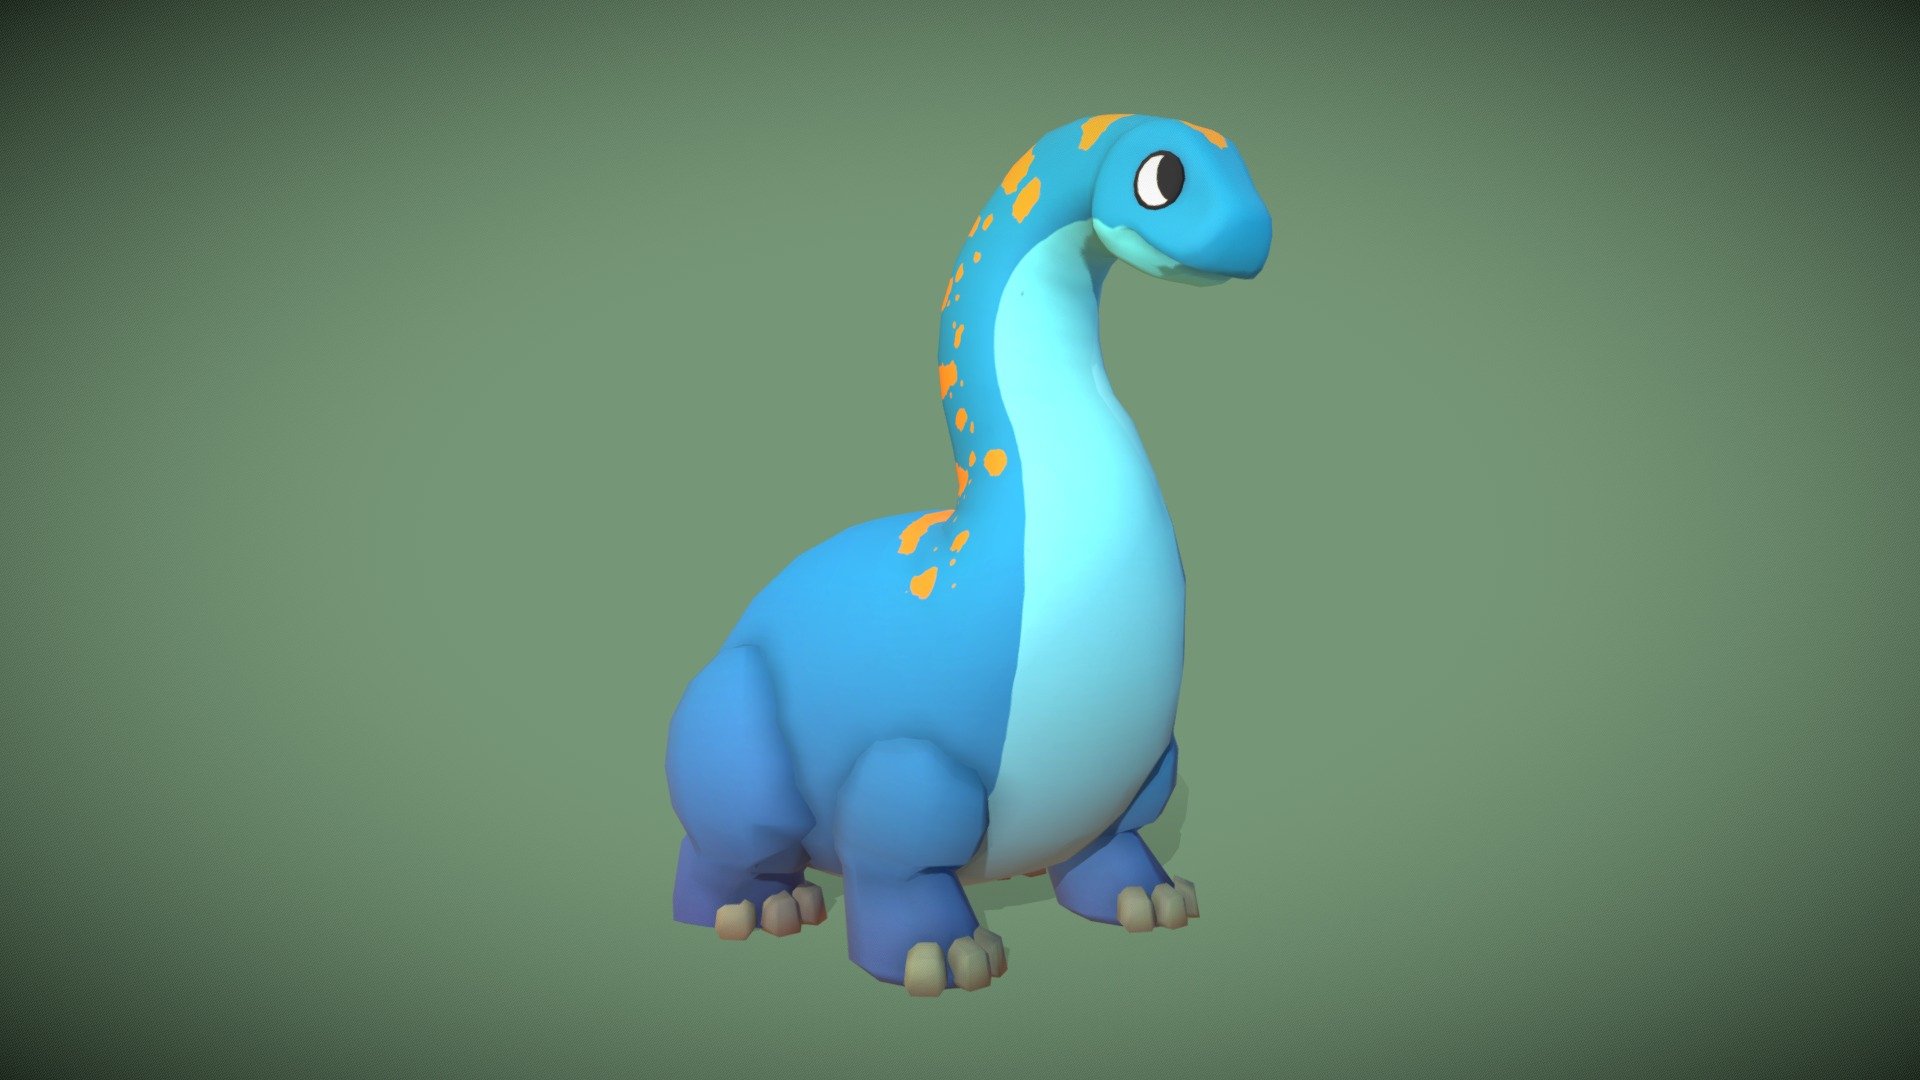 3D model of a cartoon Titanosaur for my final university project.

Modeled, Rigged and animated in Maya LT 2020, Textured in Substance Painter 3d model